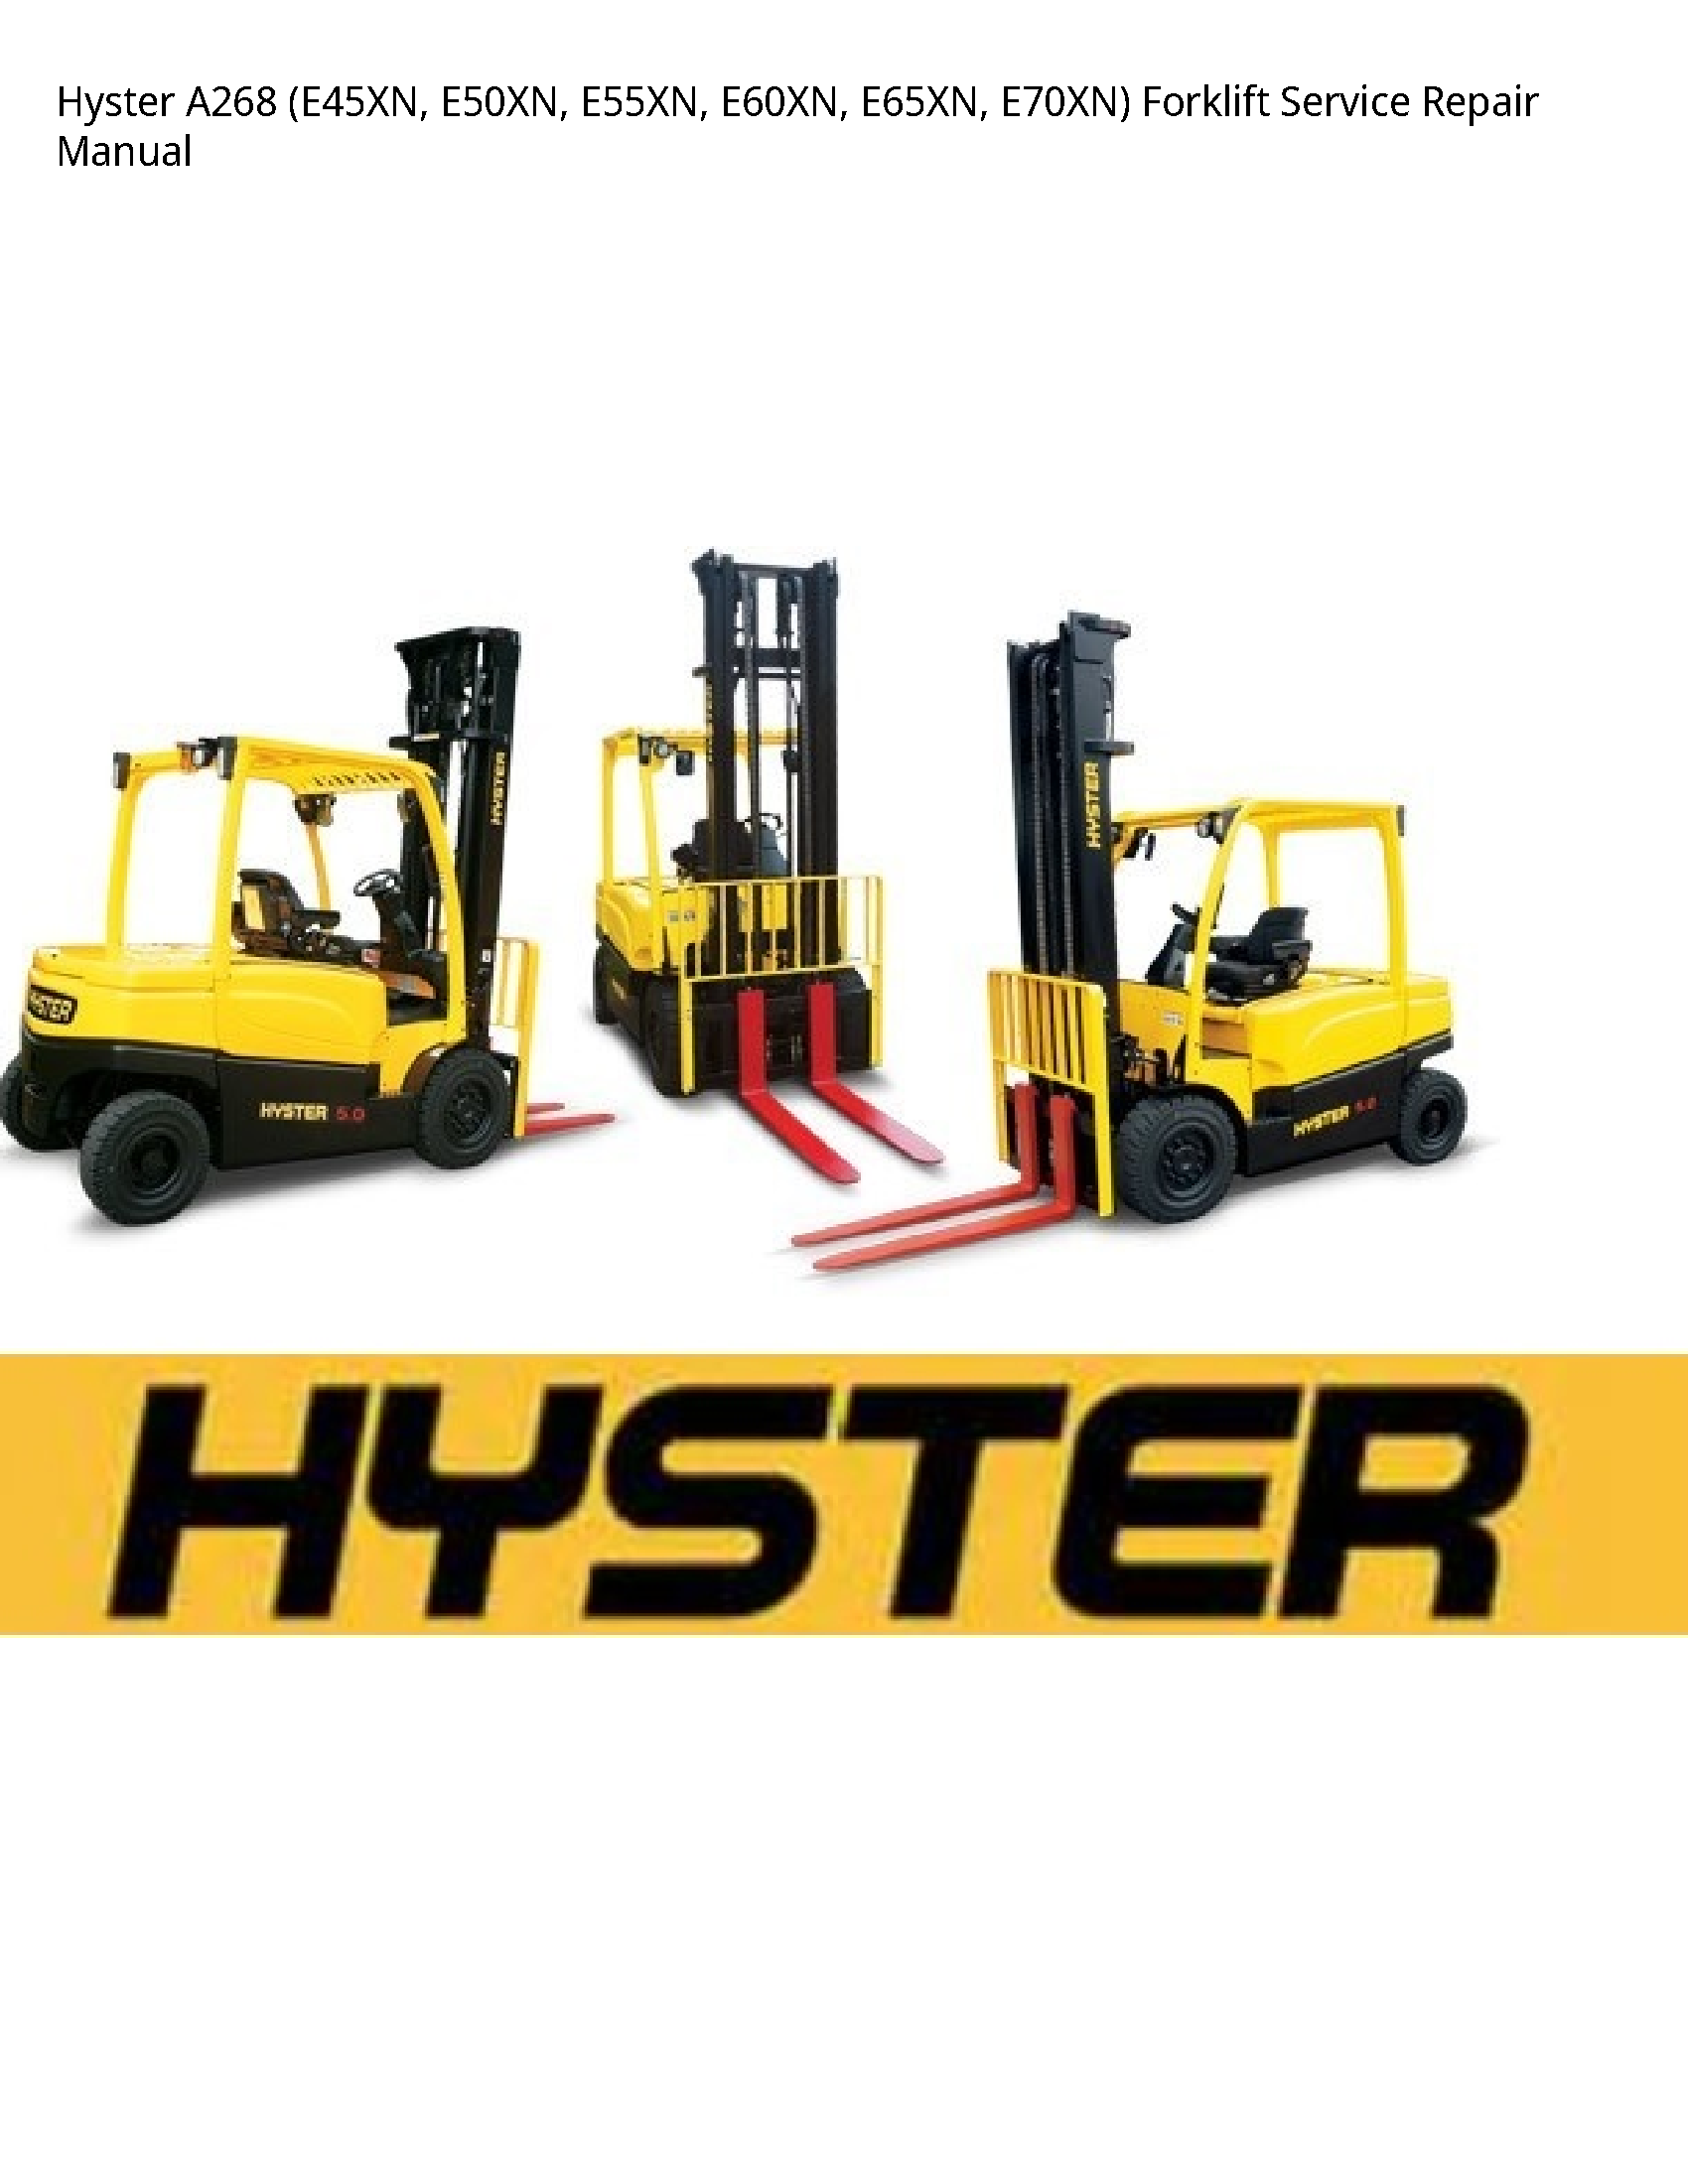 Hyster A268 Forklift manual